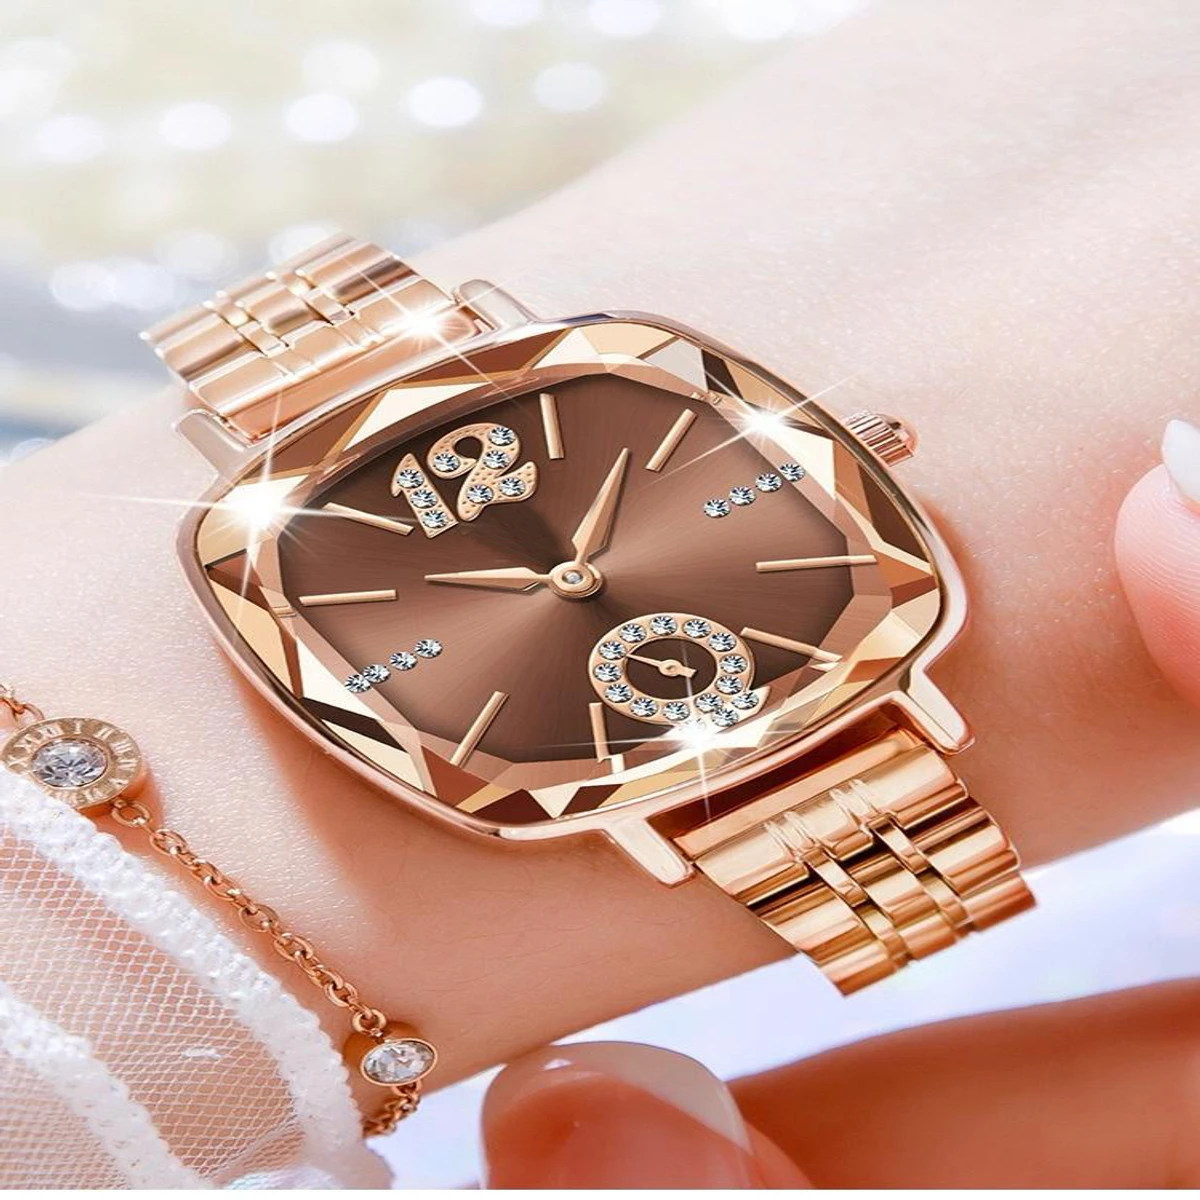 CRRJU Waterproof Ladies Wristwatch with Sparkling Rhinestone Dial and Stainless Steel Band- Deep Coffee